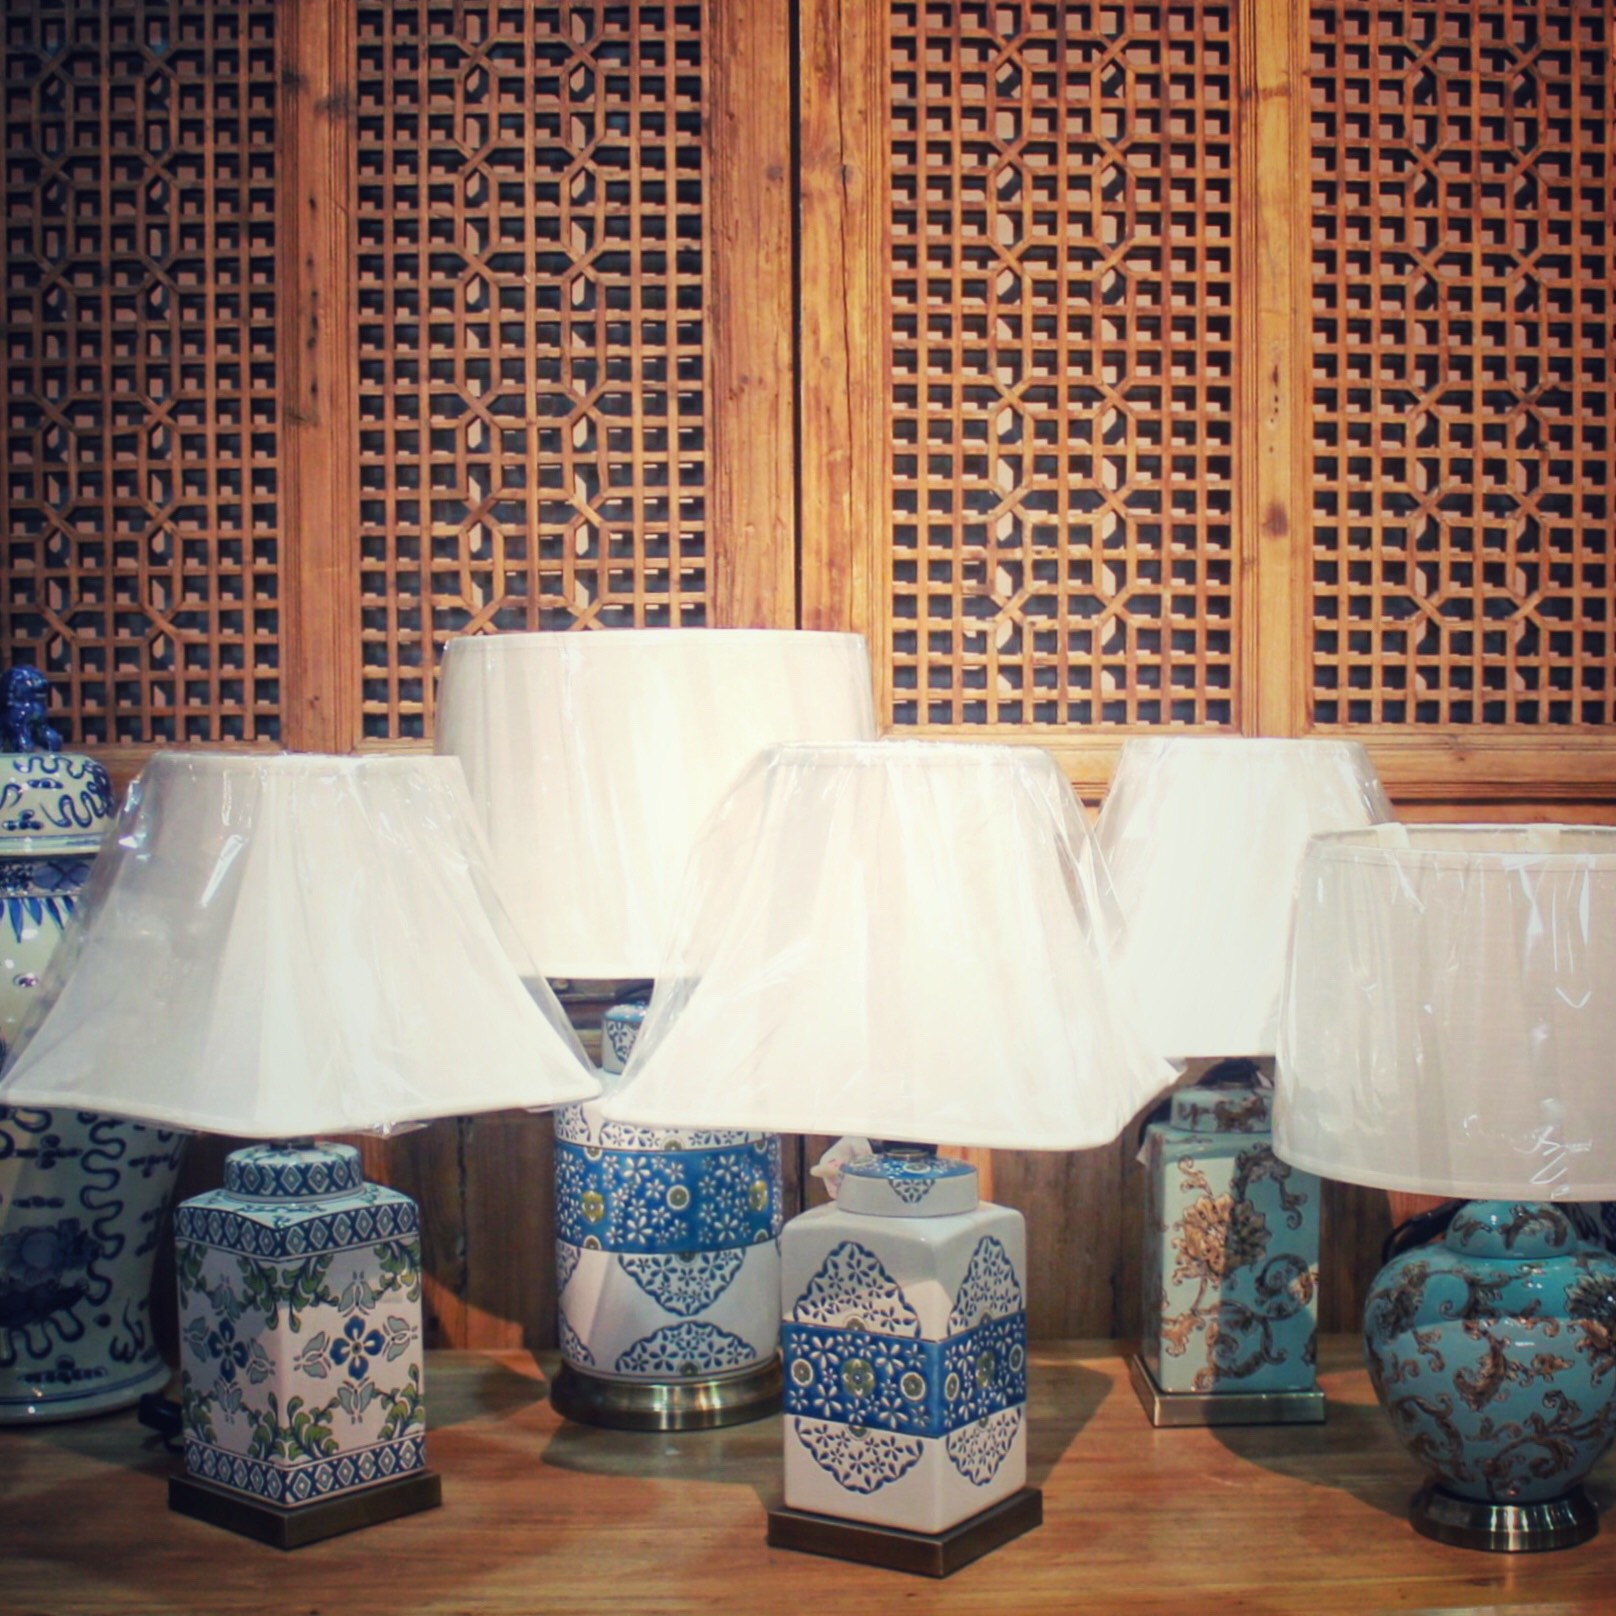 Assorted porcelain Table lamps with modern blue & white patterns